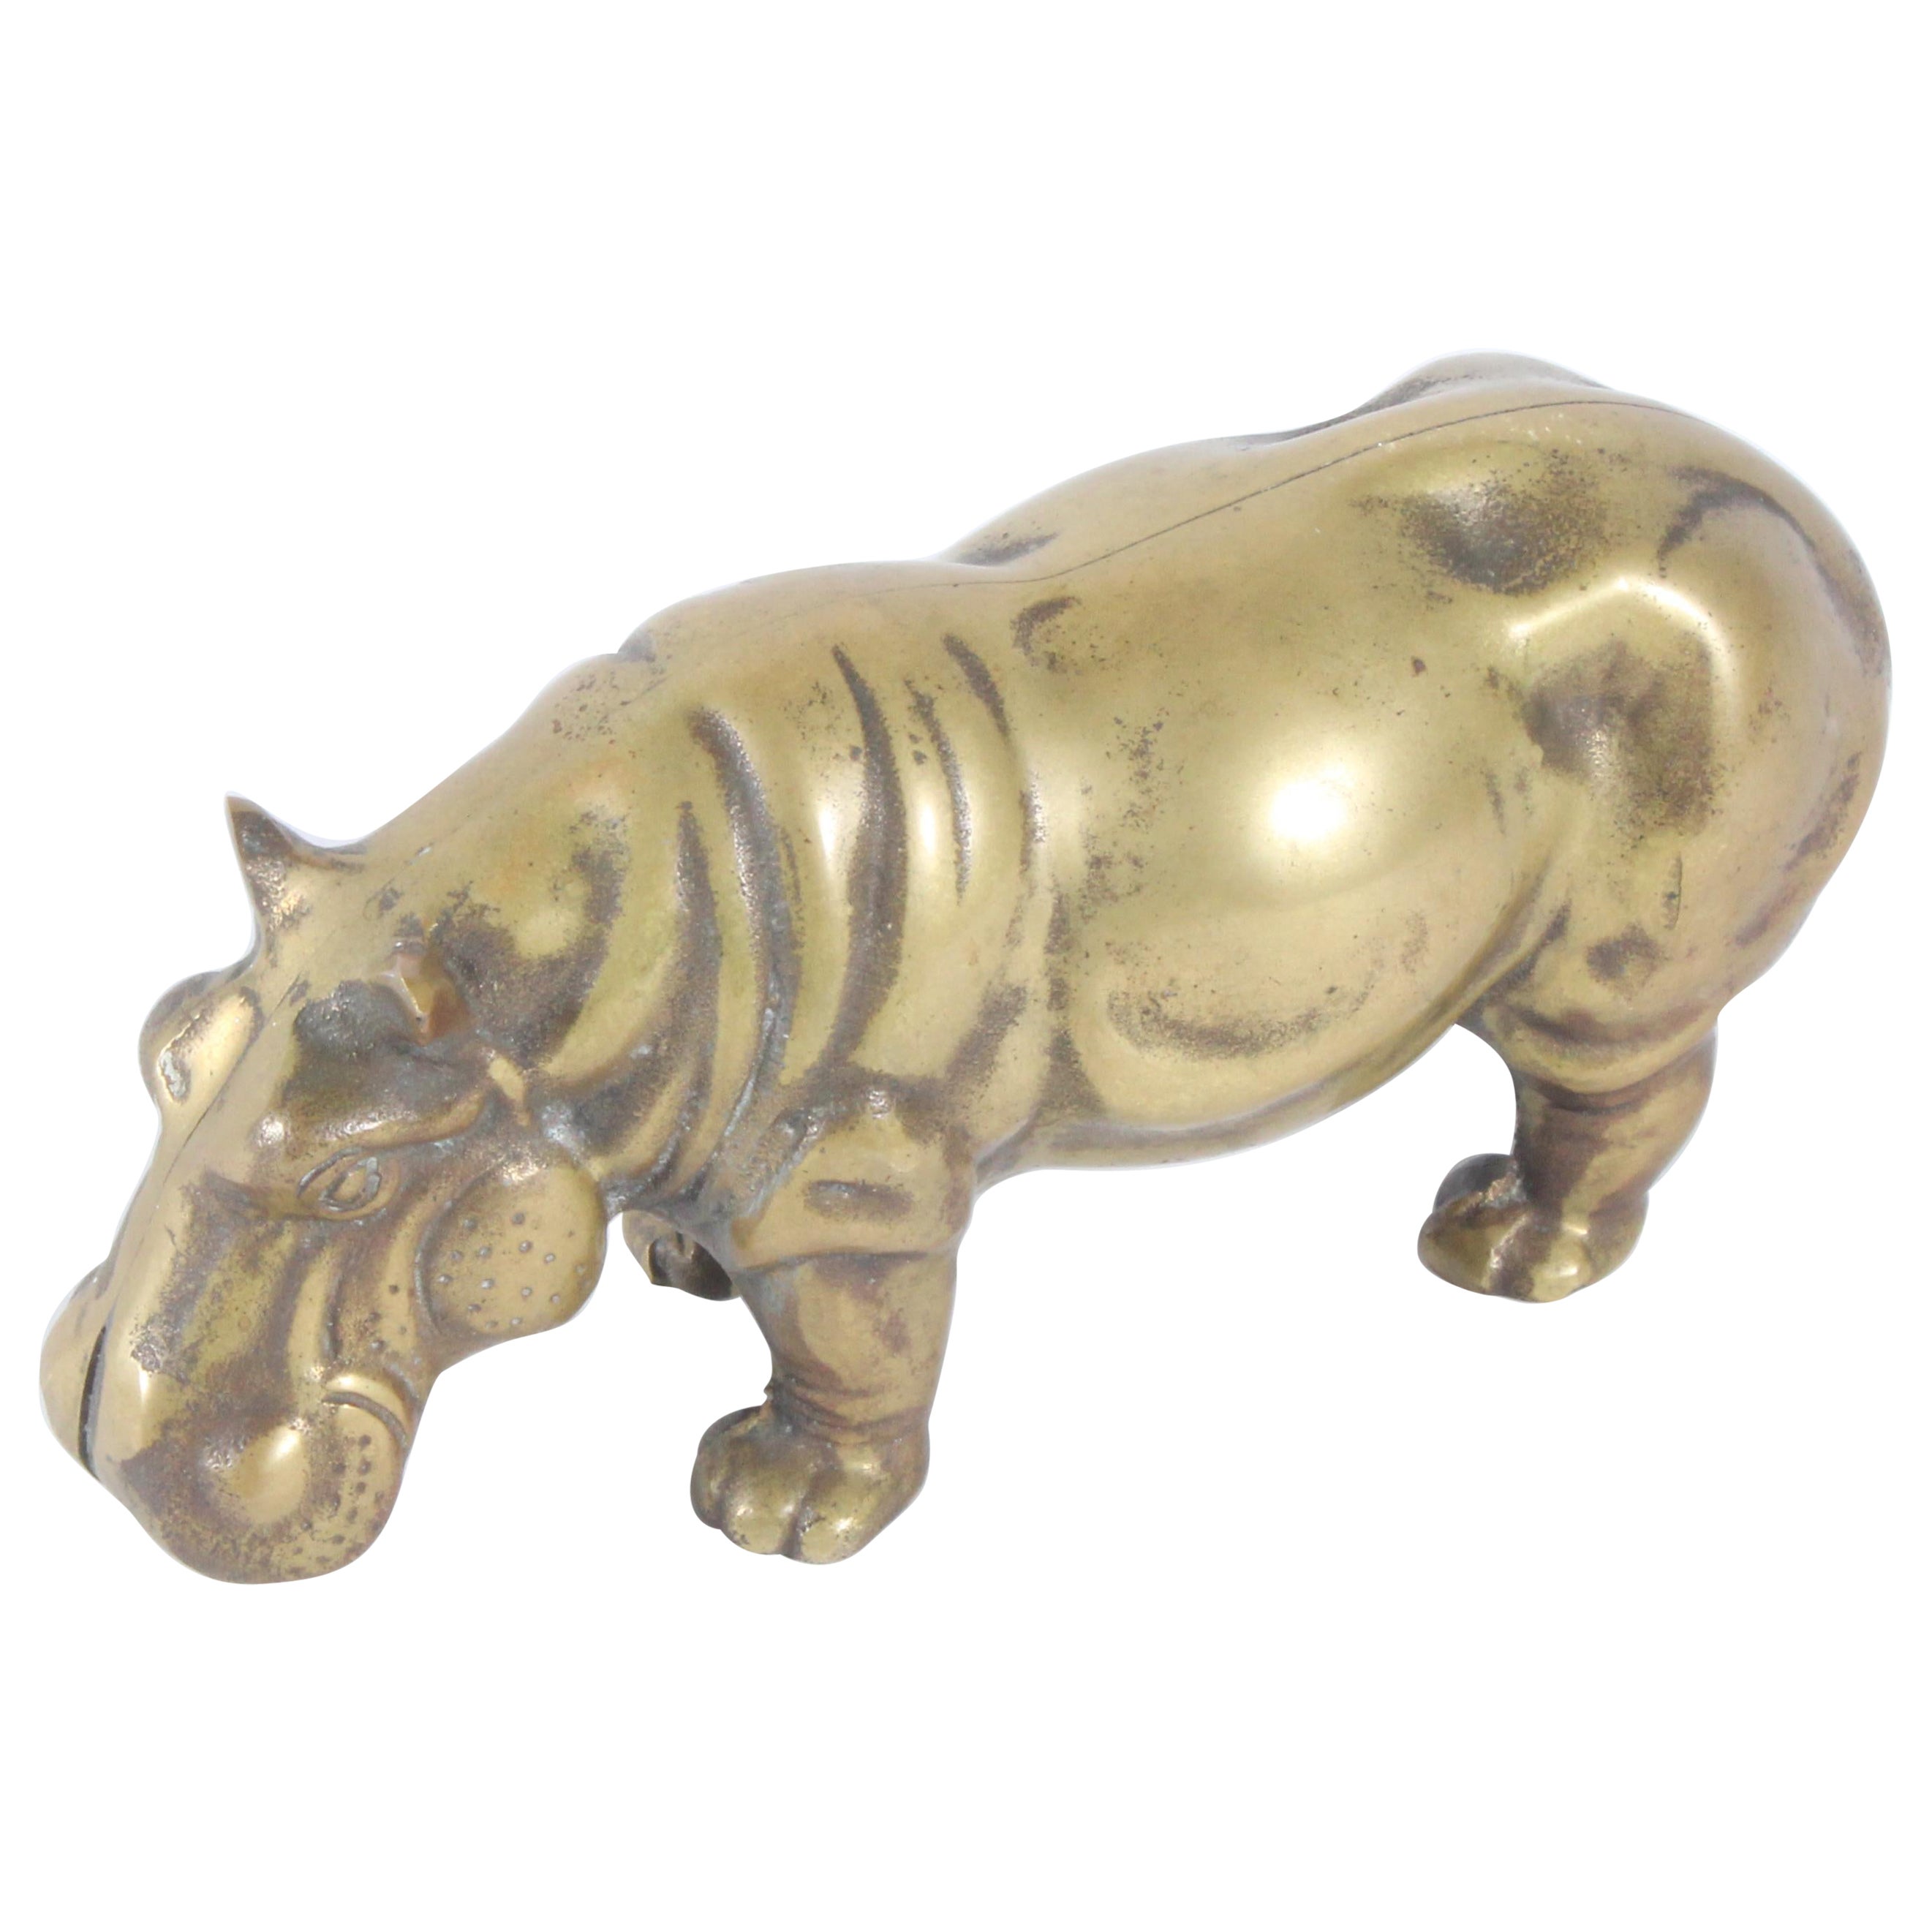 Charming Vintage Italian Sculpture of a Hippo In Brass